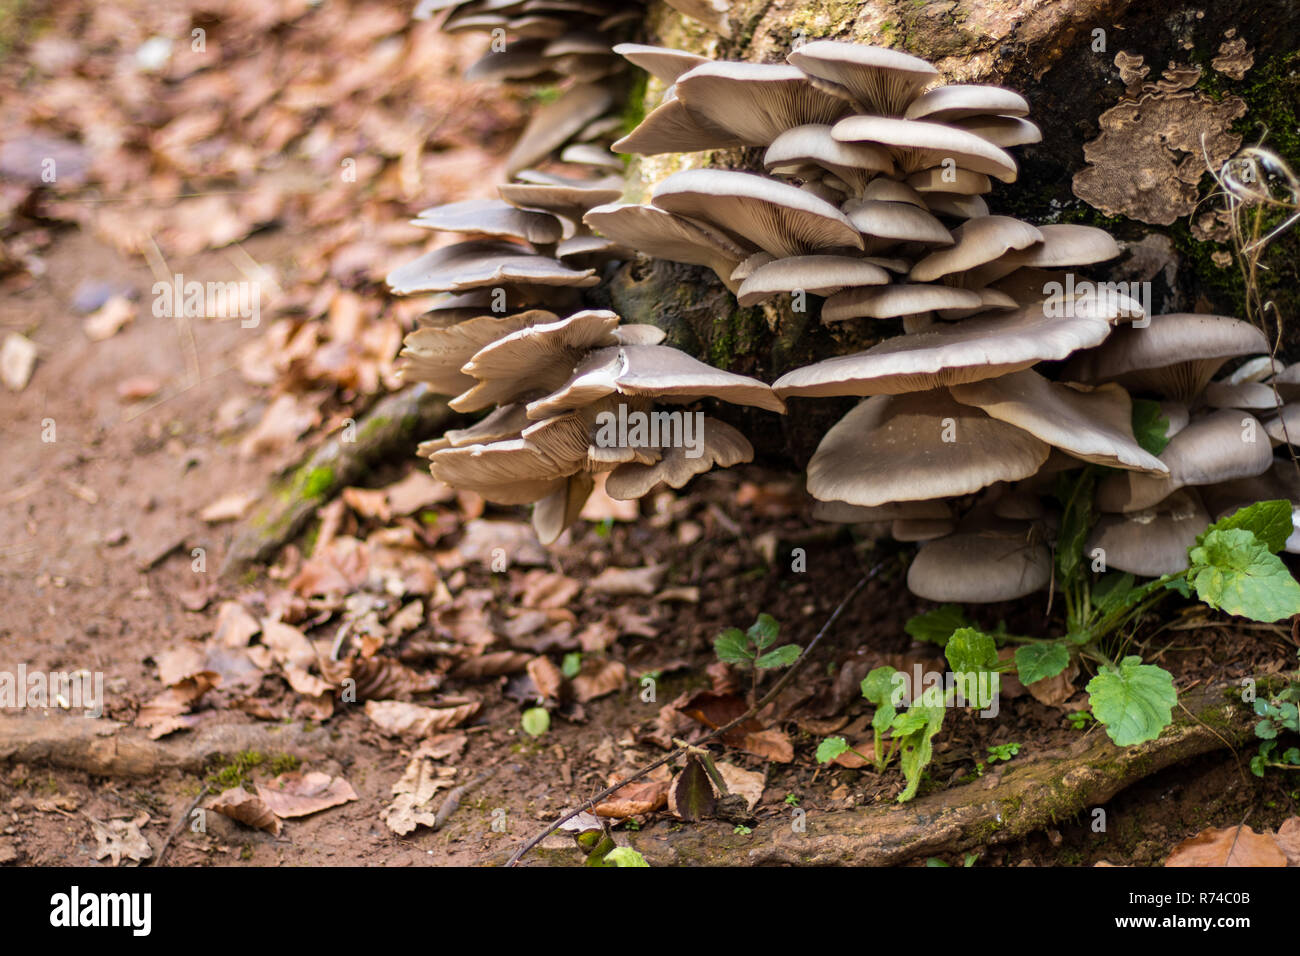 A cluster of mushrooms growing from a tree stump Stock Photo